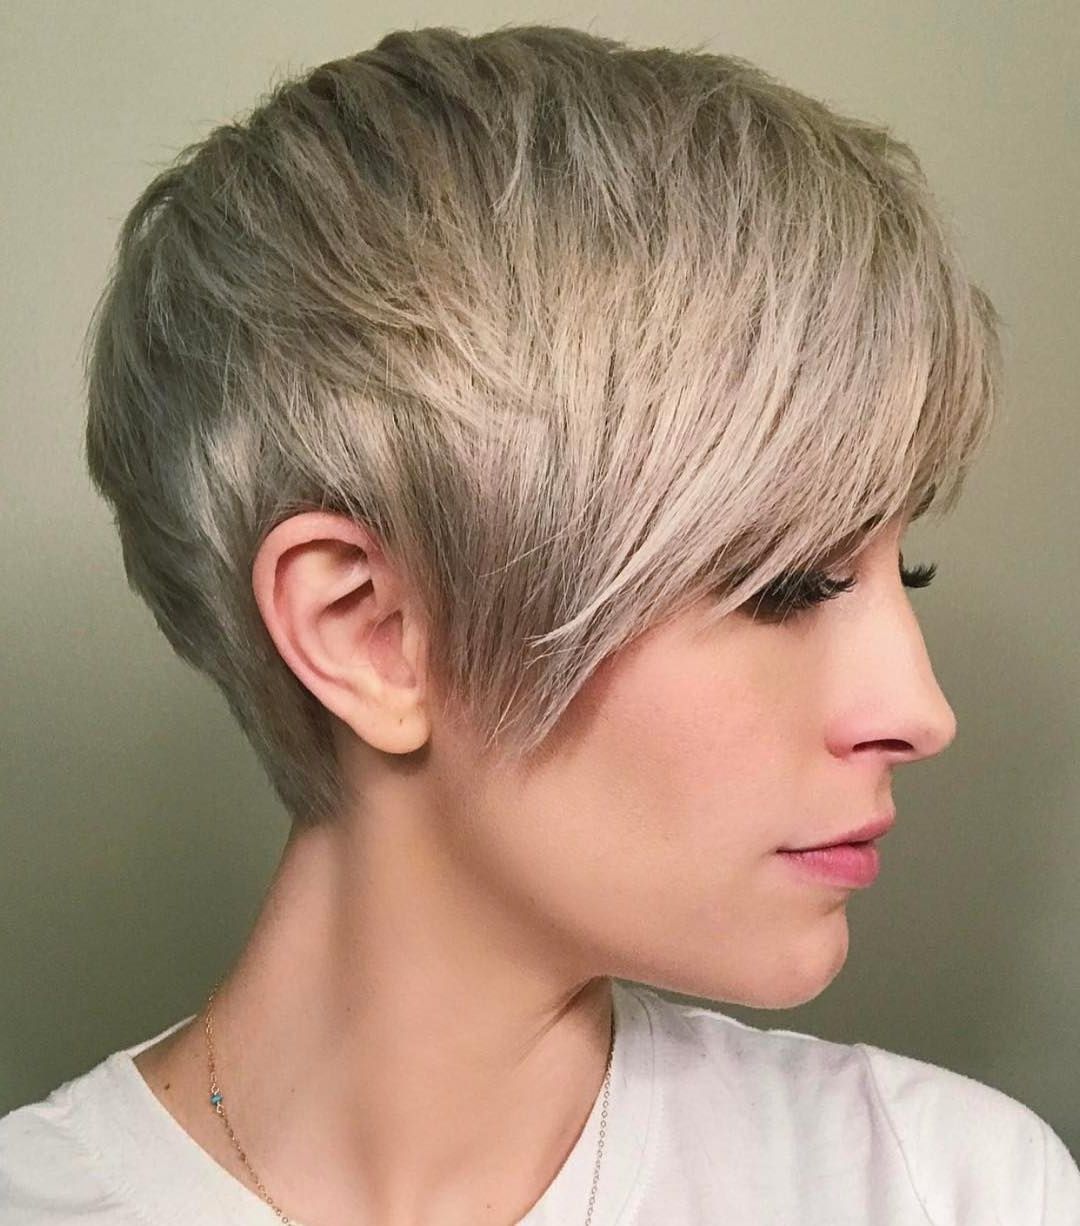 10 Best Short Straight Hairstyle Trends – Women Short Haircut Ideas 2018 For Most Recent Side Parted Blonde Balayage Pixie Haircuts (View 7 of 15)